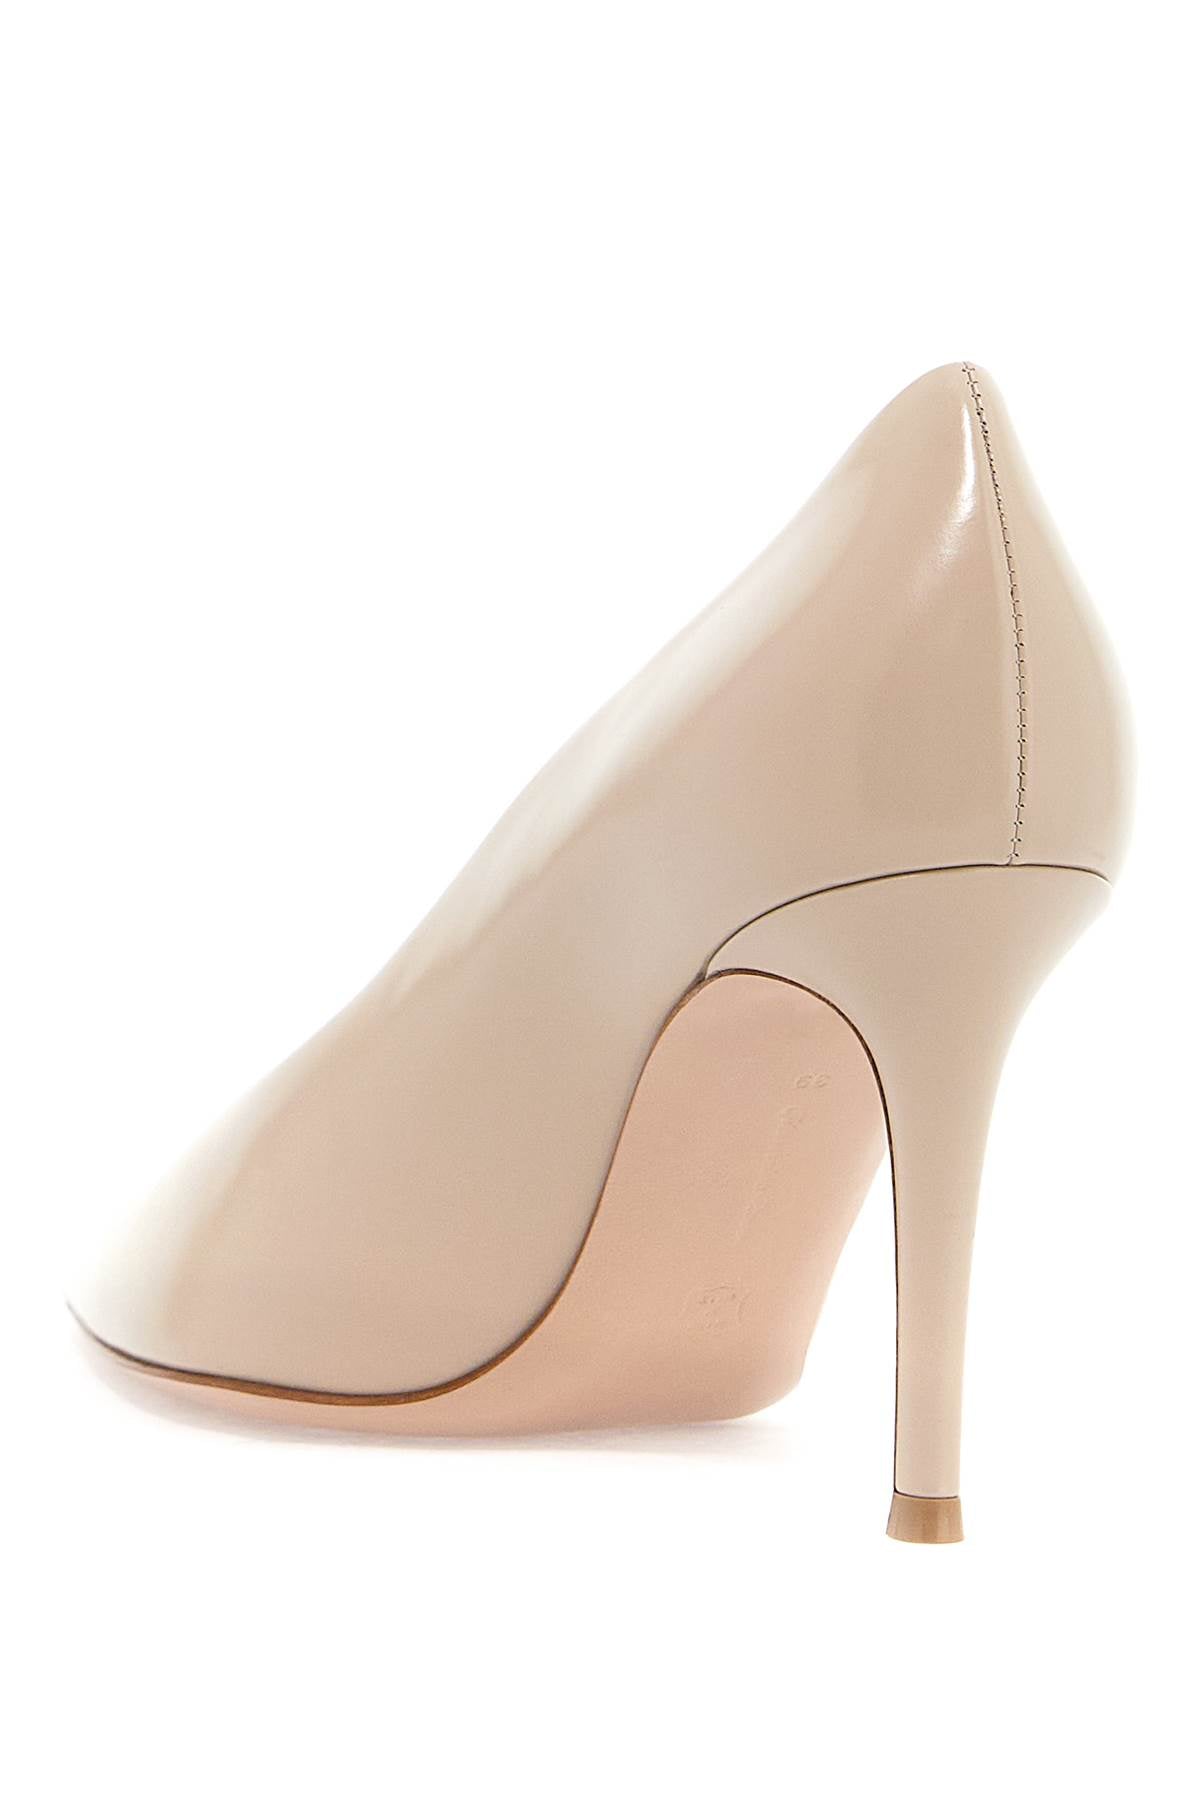 GIANVITO ROSSI The Tan Leather Pointed Pumps for Women